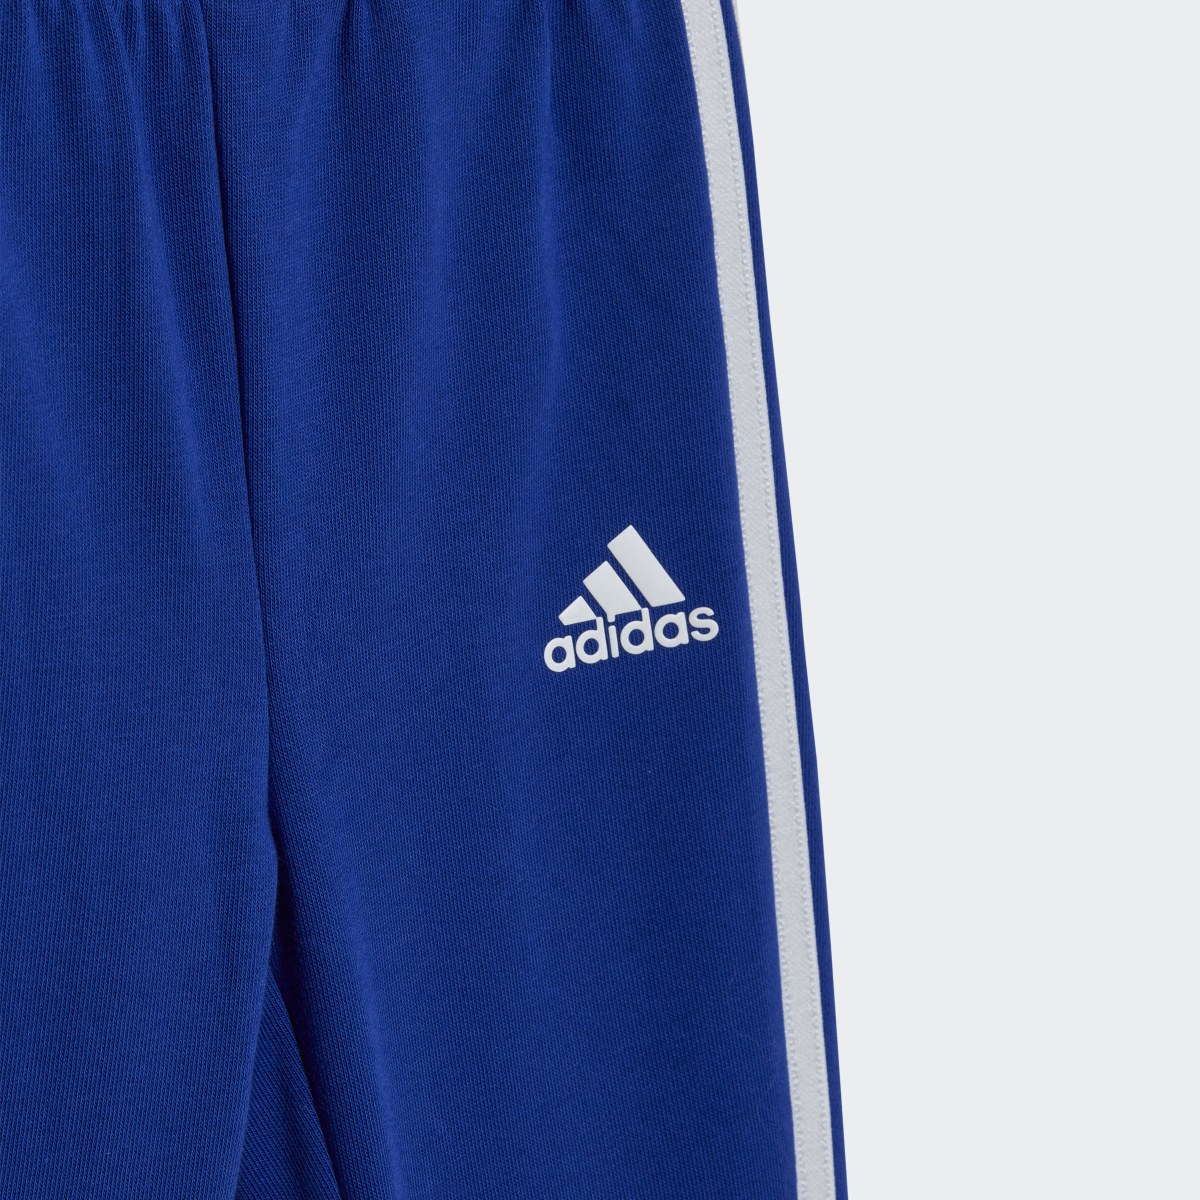 Adidas Colorblock French Terry Jogger. 9